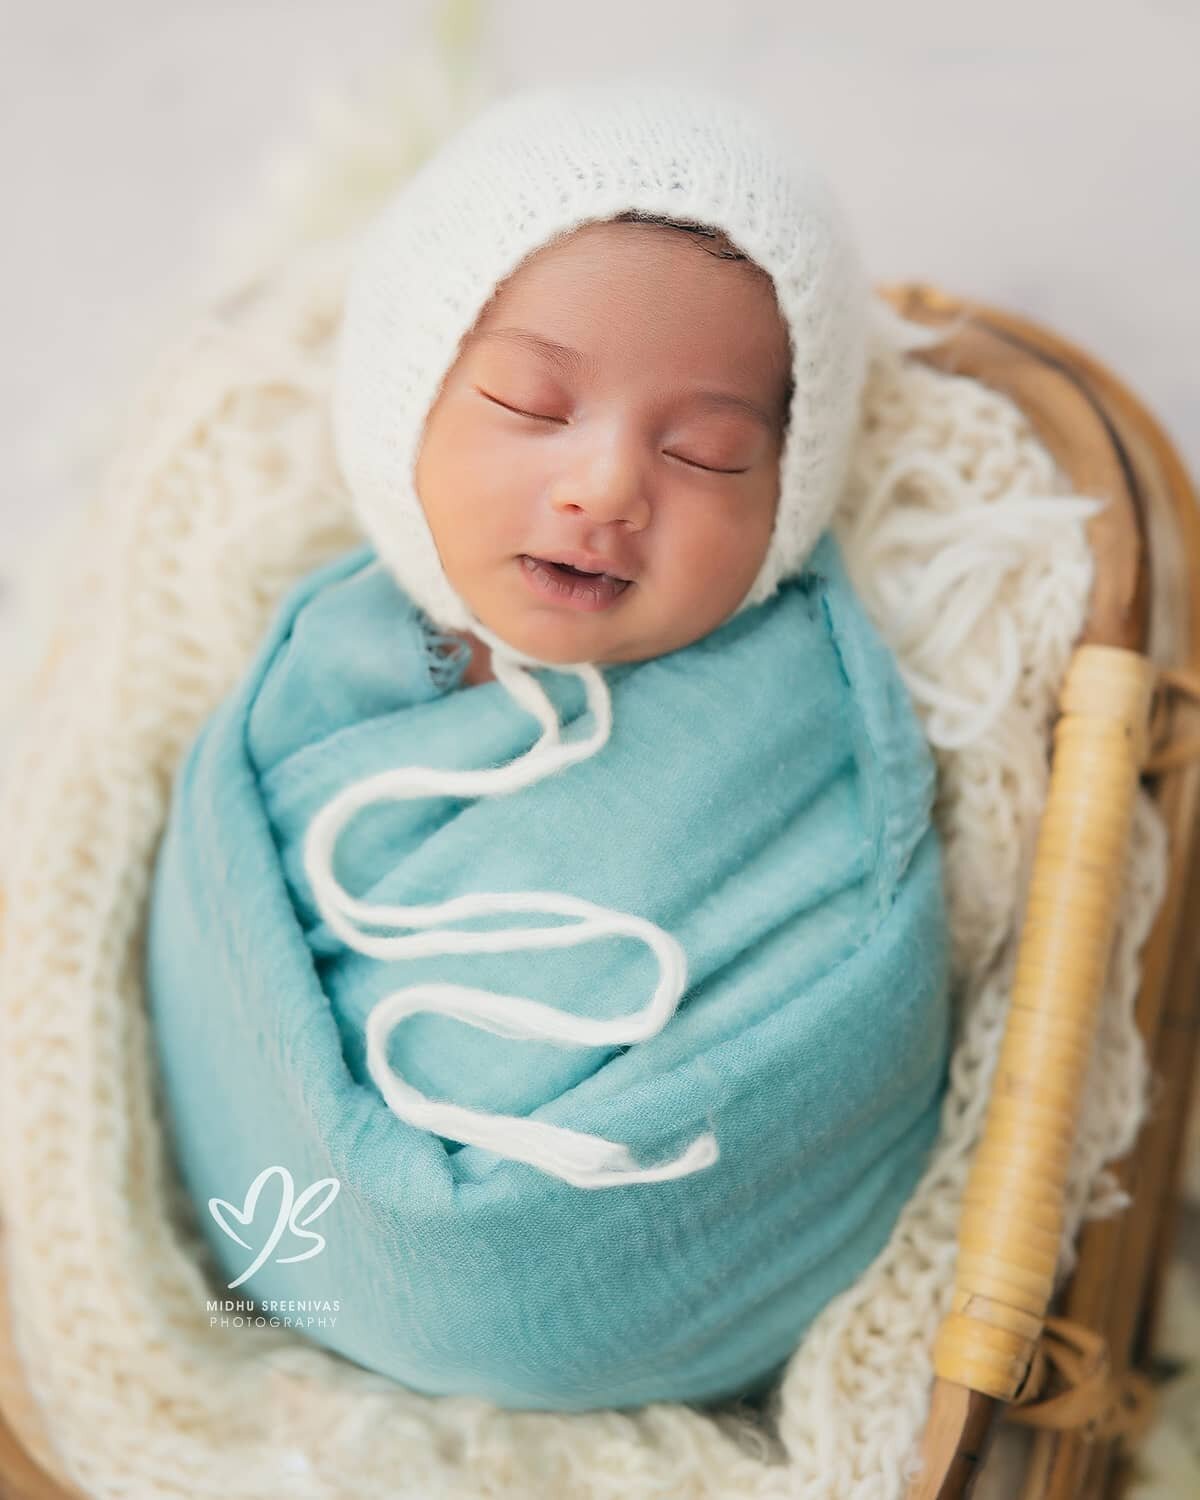 Little peanut, tightly wrapped  up like a  bud❣️

------------------------------------------------

**Note to all new and to-be-parents**

The best time to photograph newborns is when they are between 5 and 15 days old. 

In light of the prevailing p